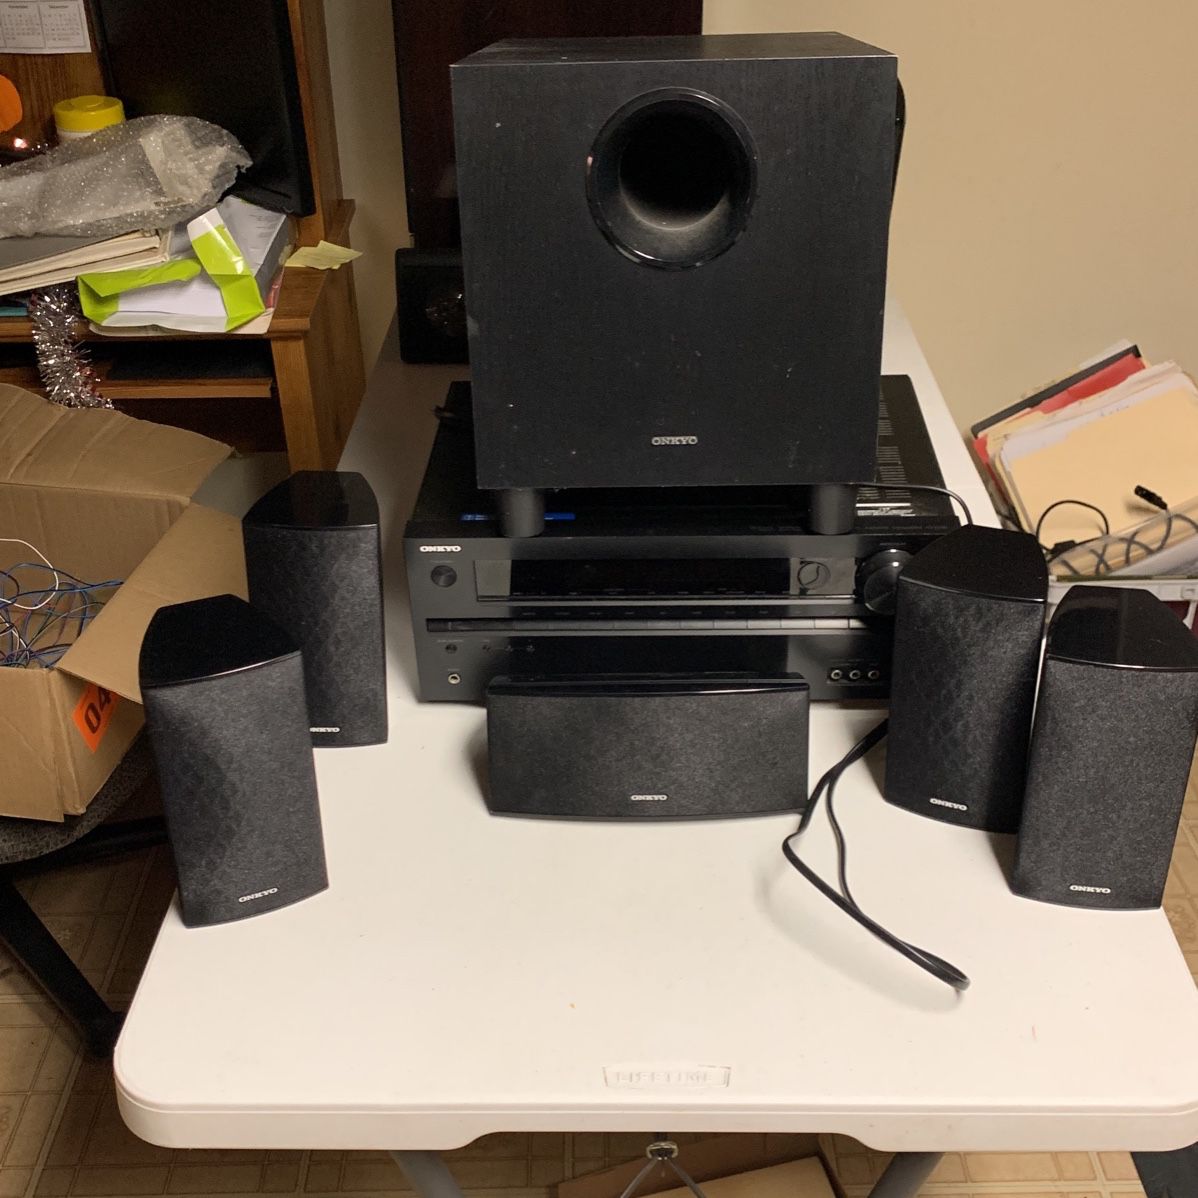 Onkyo Surround Sound Speakers And Sub Woofer With Receiver